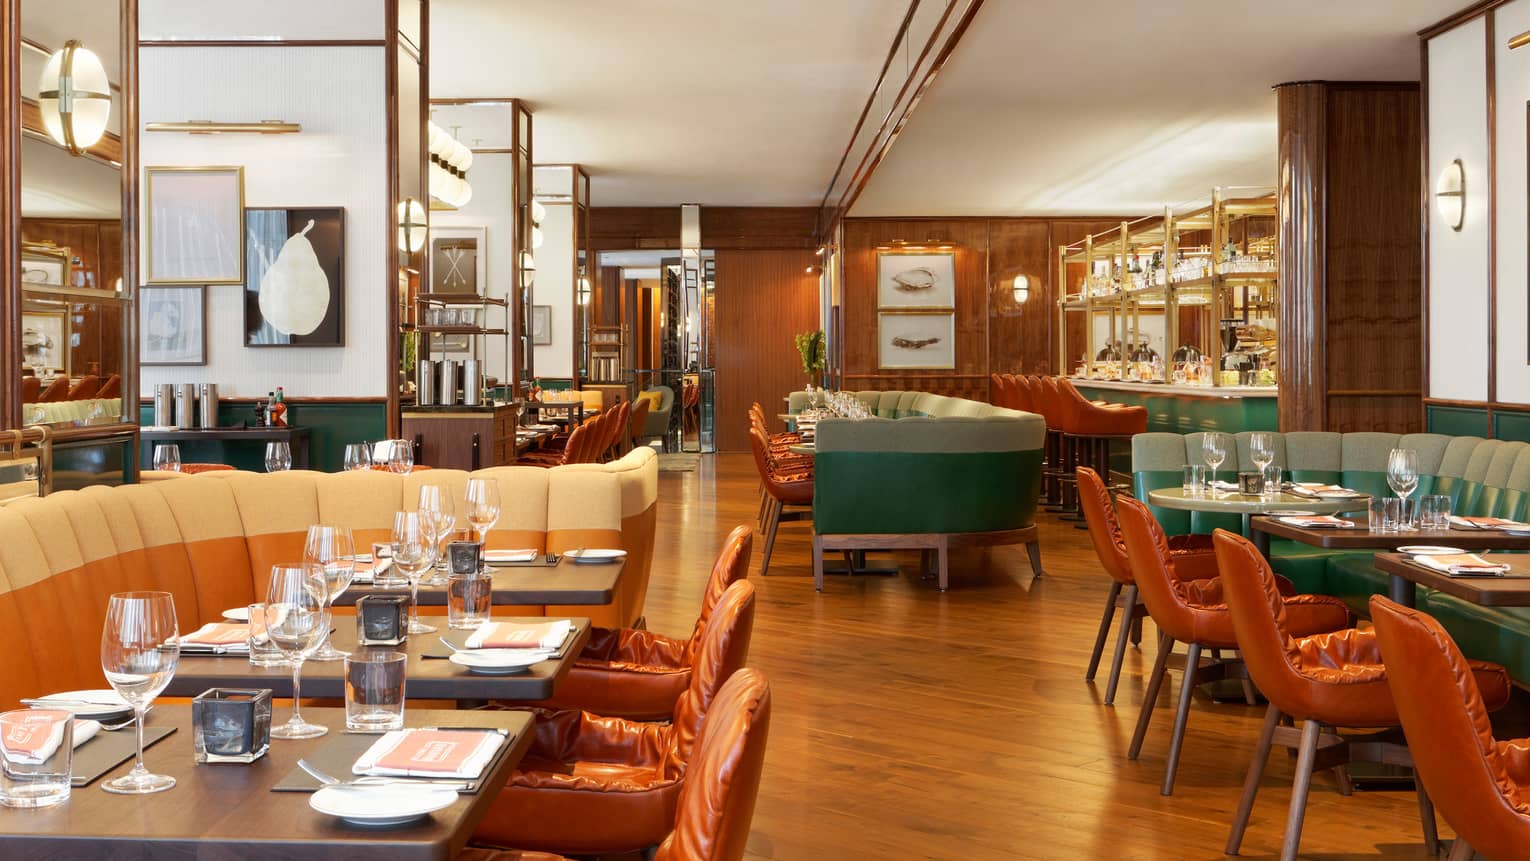 Cafe Boulud dining room with leather chairs, banquettes, sunny dining room